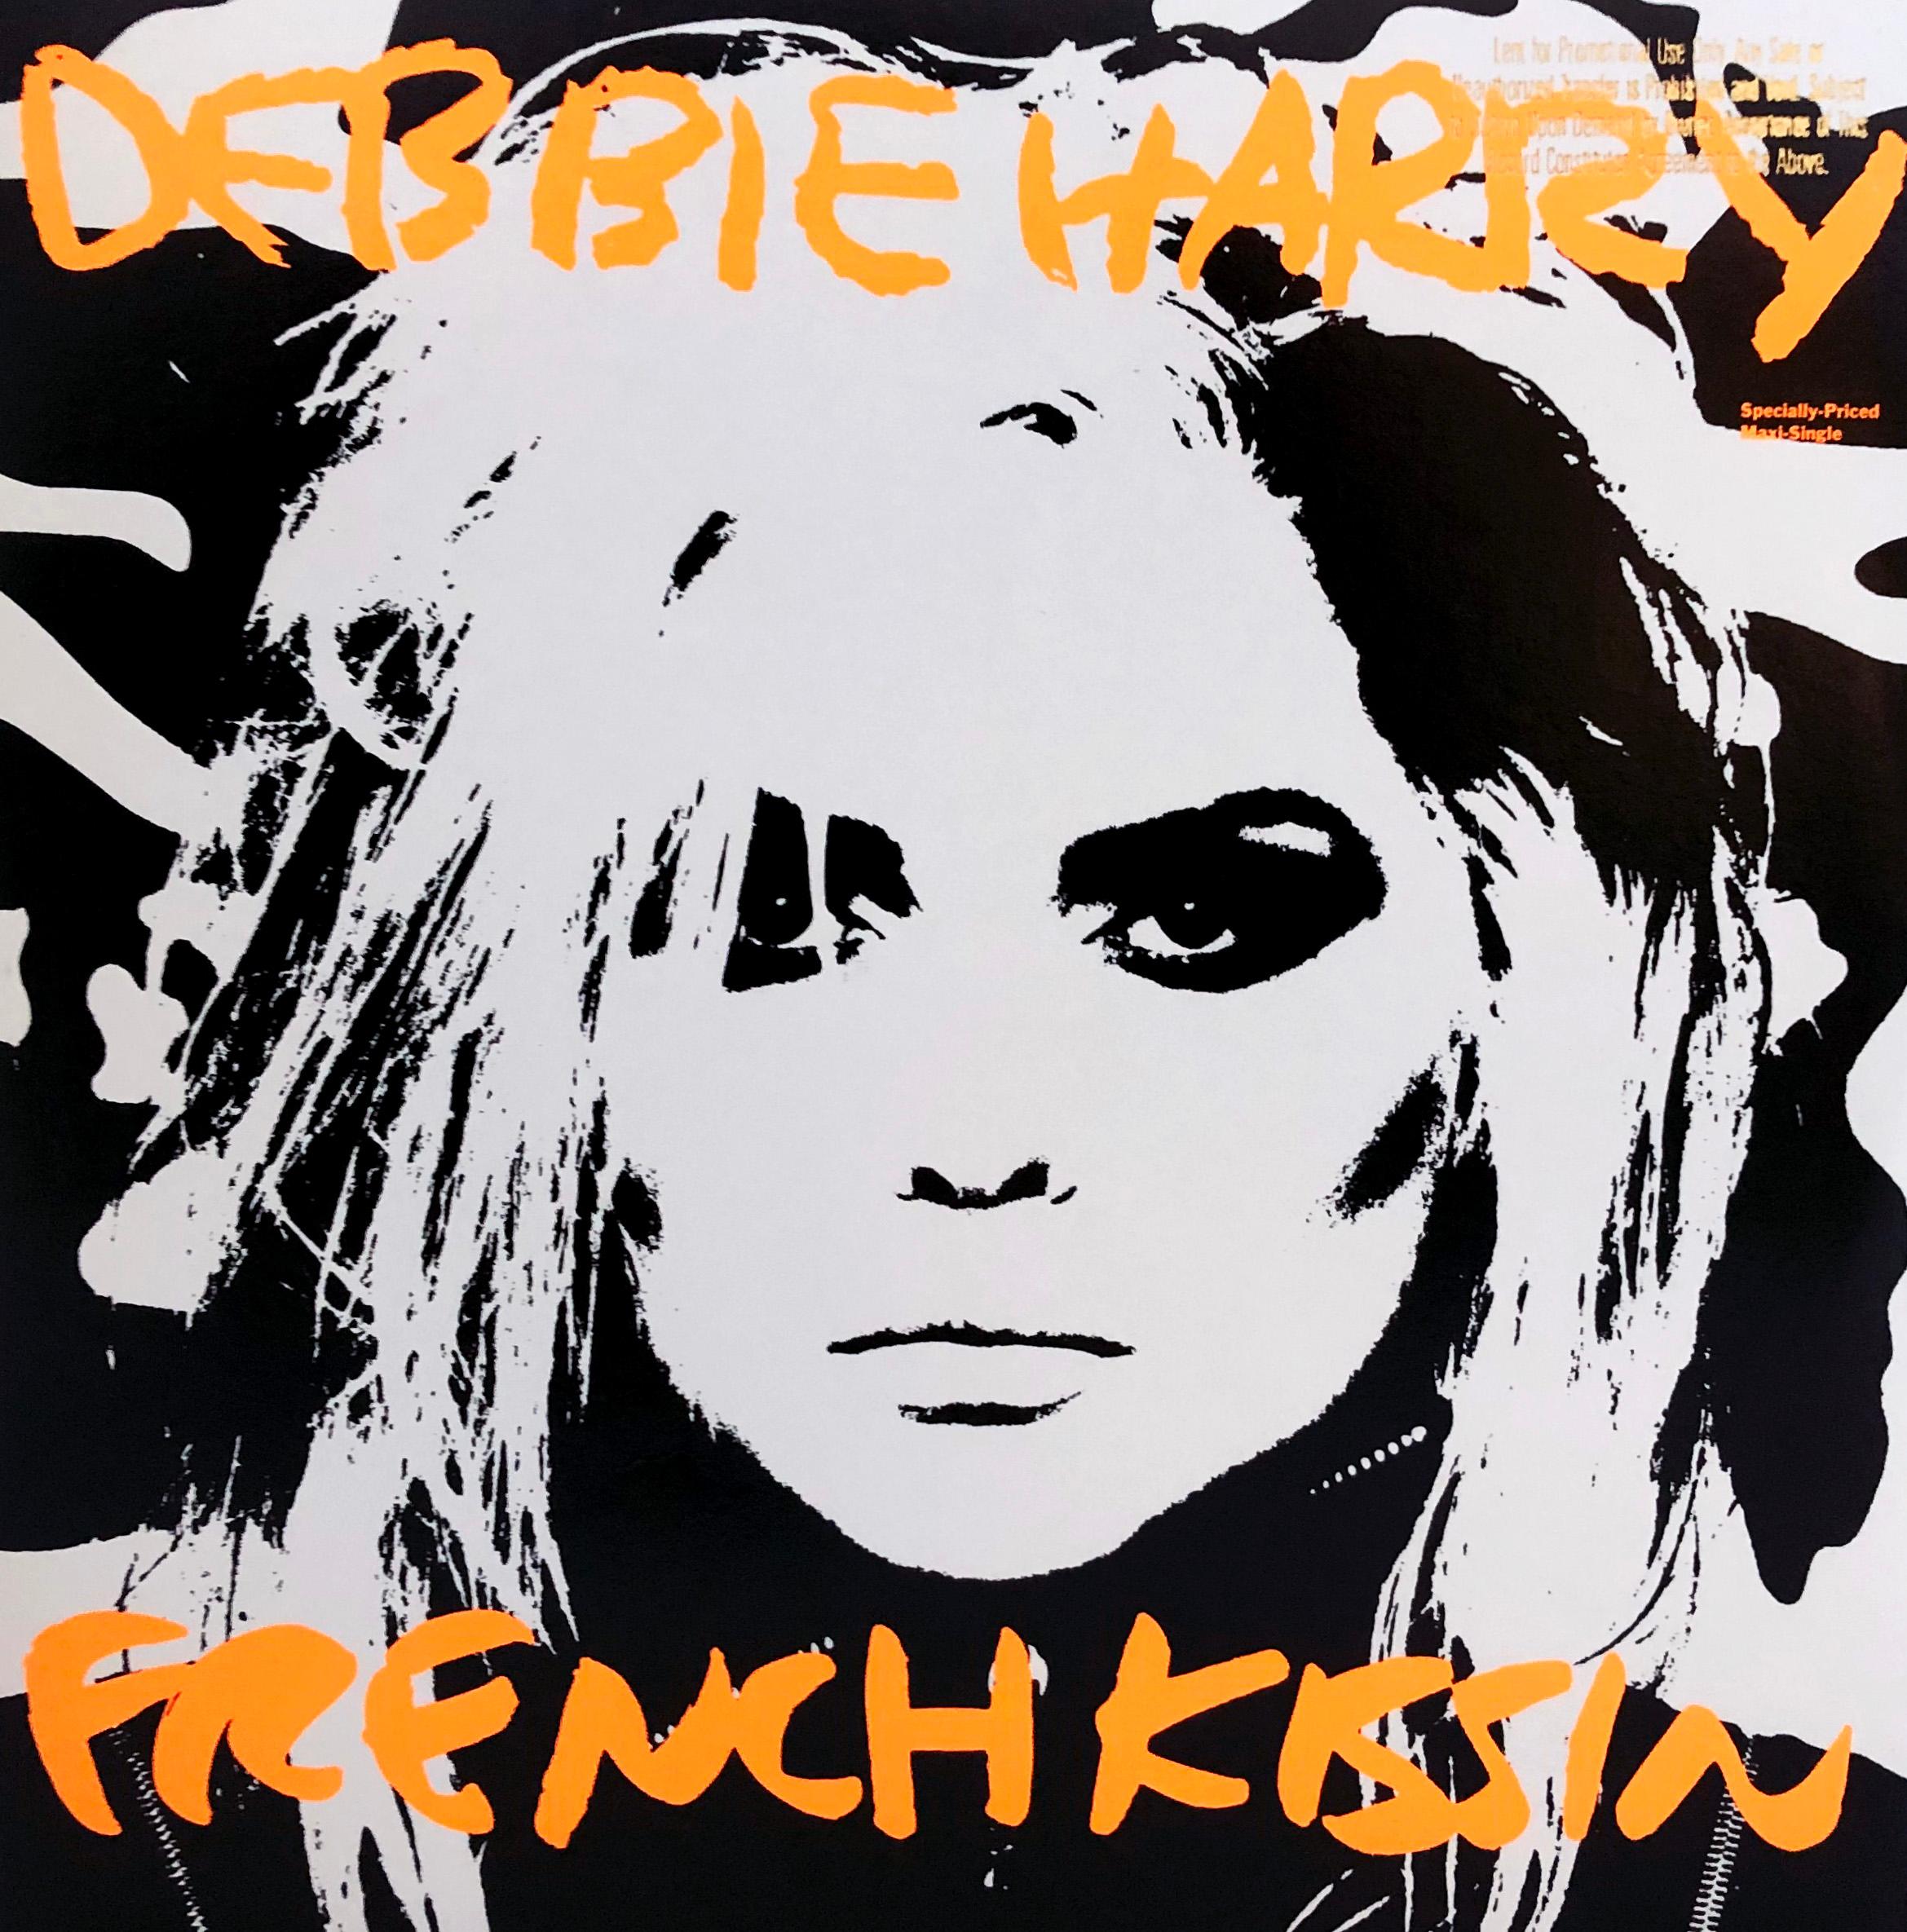 Andy Warhol Album Cover Art, 1986
Debbie Harry, "French Kissin" Vinyl Album; 1986 1st pressing. 
Featured prominently in 'Andy Warhol: The Record Covers, 1949-1987, a Catalog Raisonne' by Warhol scholar Paul Marechal.
Inspired by Warhol's noted